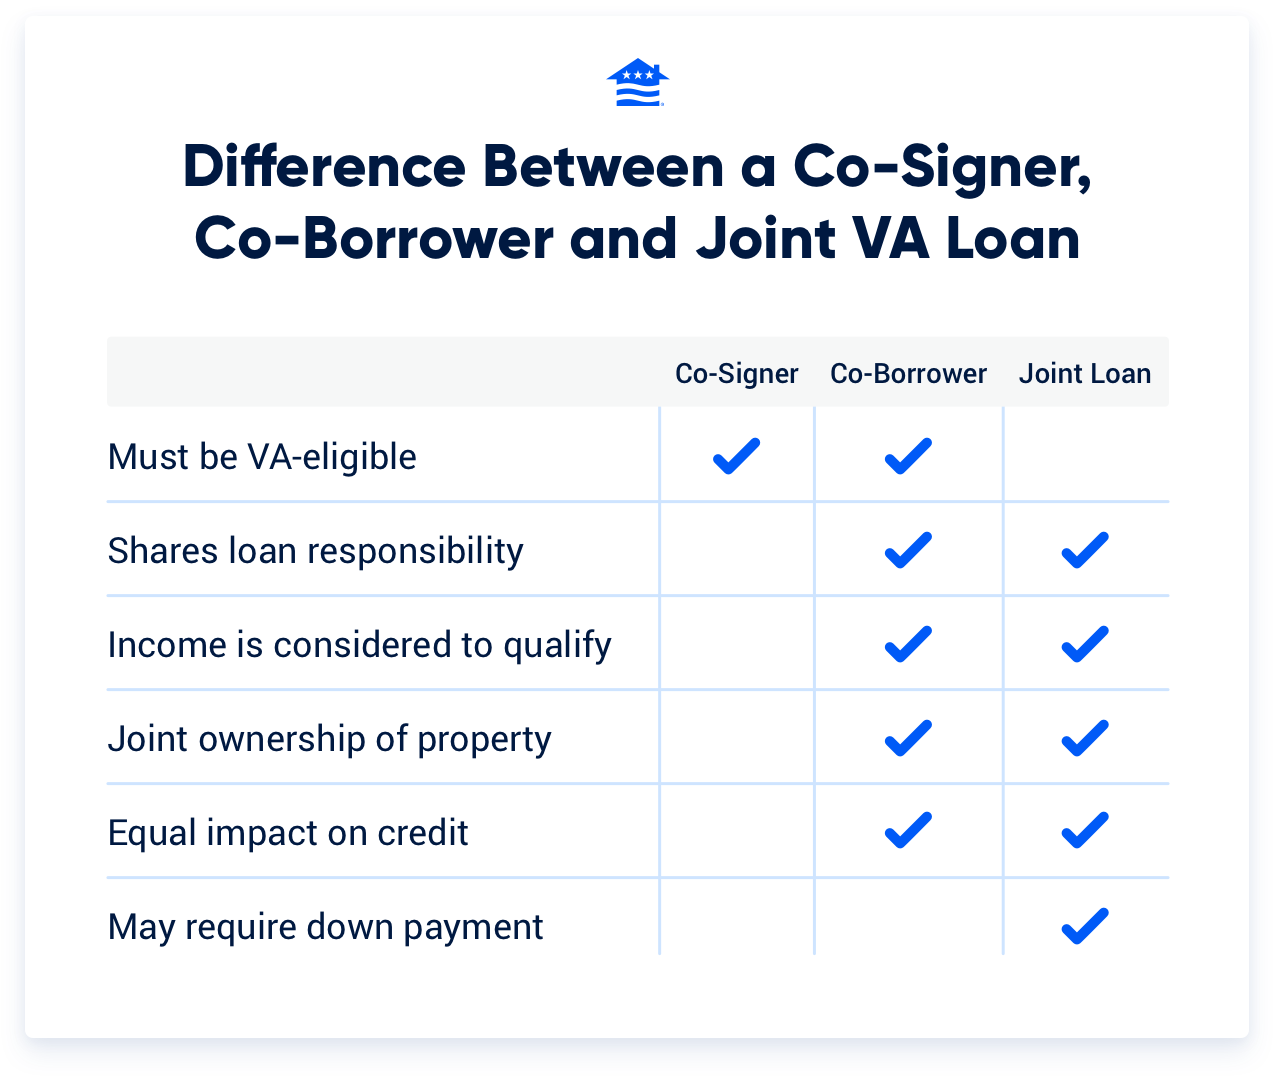 A chart describing the differences between a co-signer, co-borrower, and joint VA loan